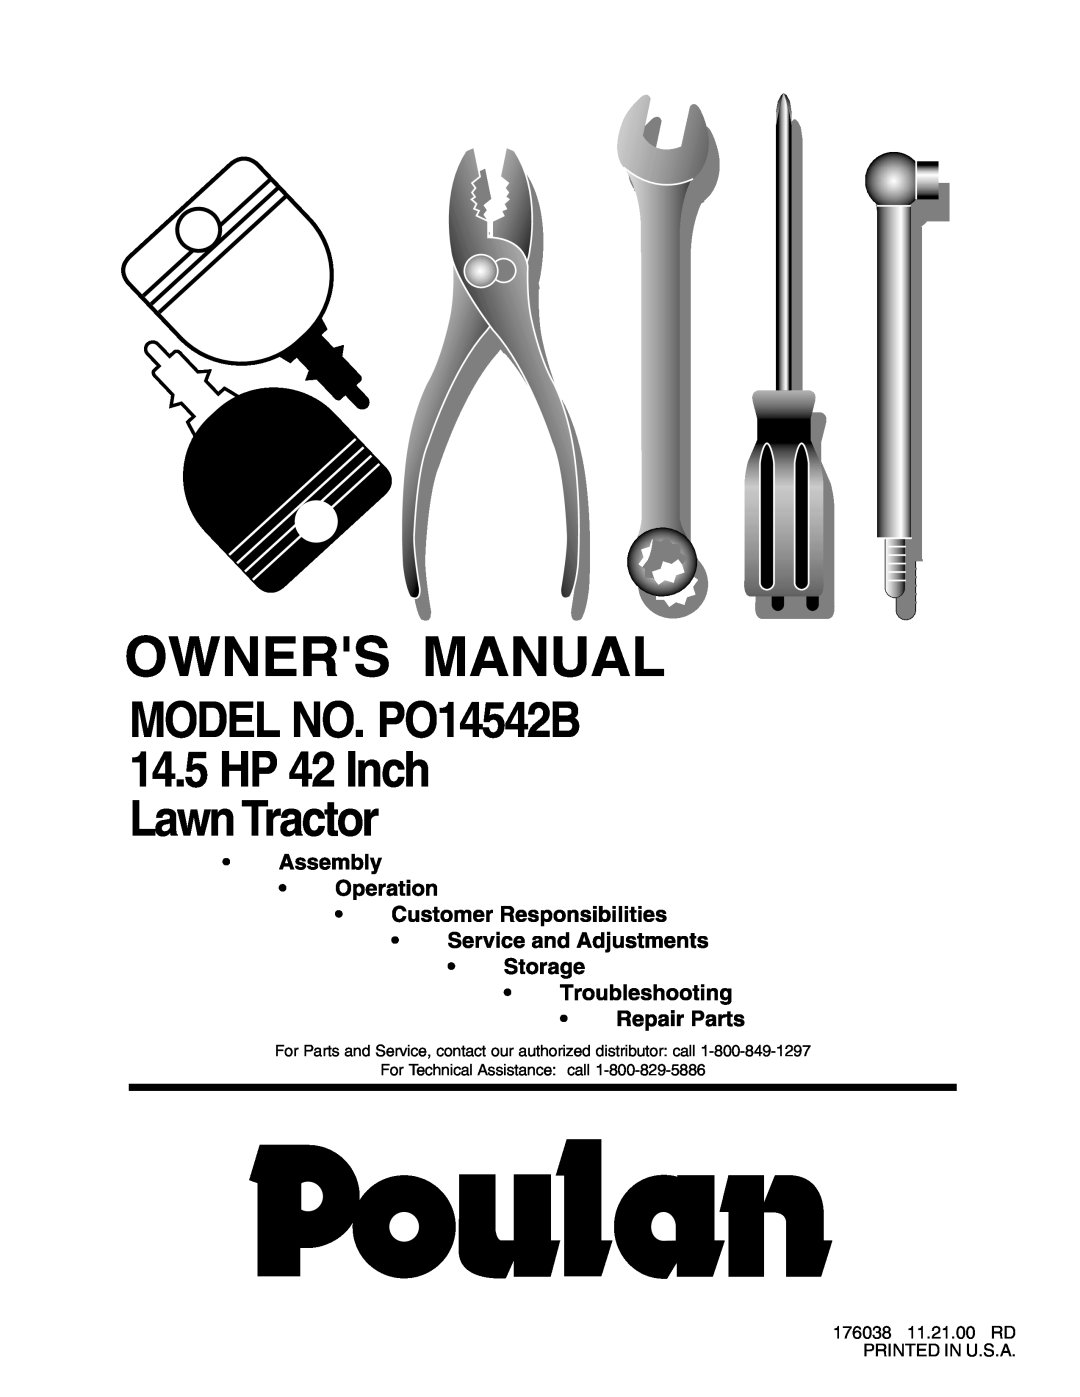 Poulan owner manual Owners Manual, MODEL NO. PO14542B 14.5 HP 42 Inch LawnTractor 